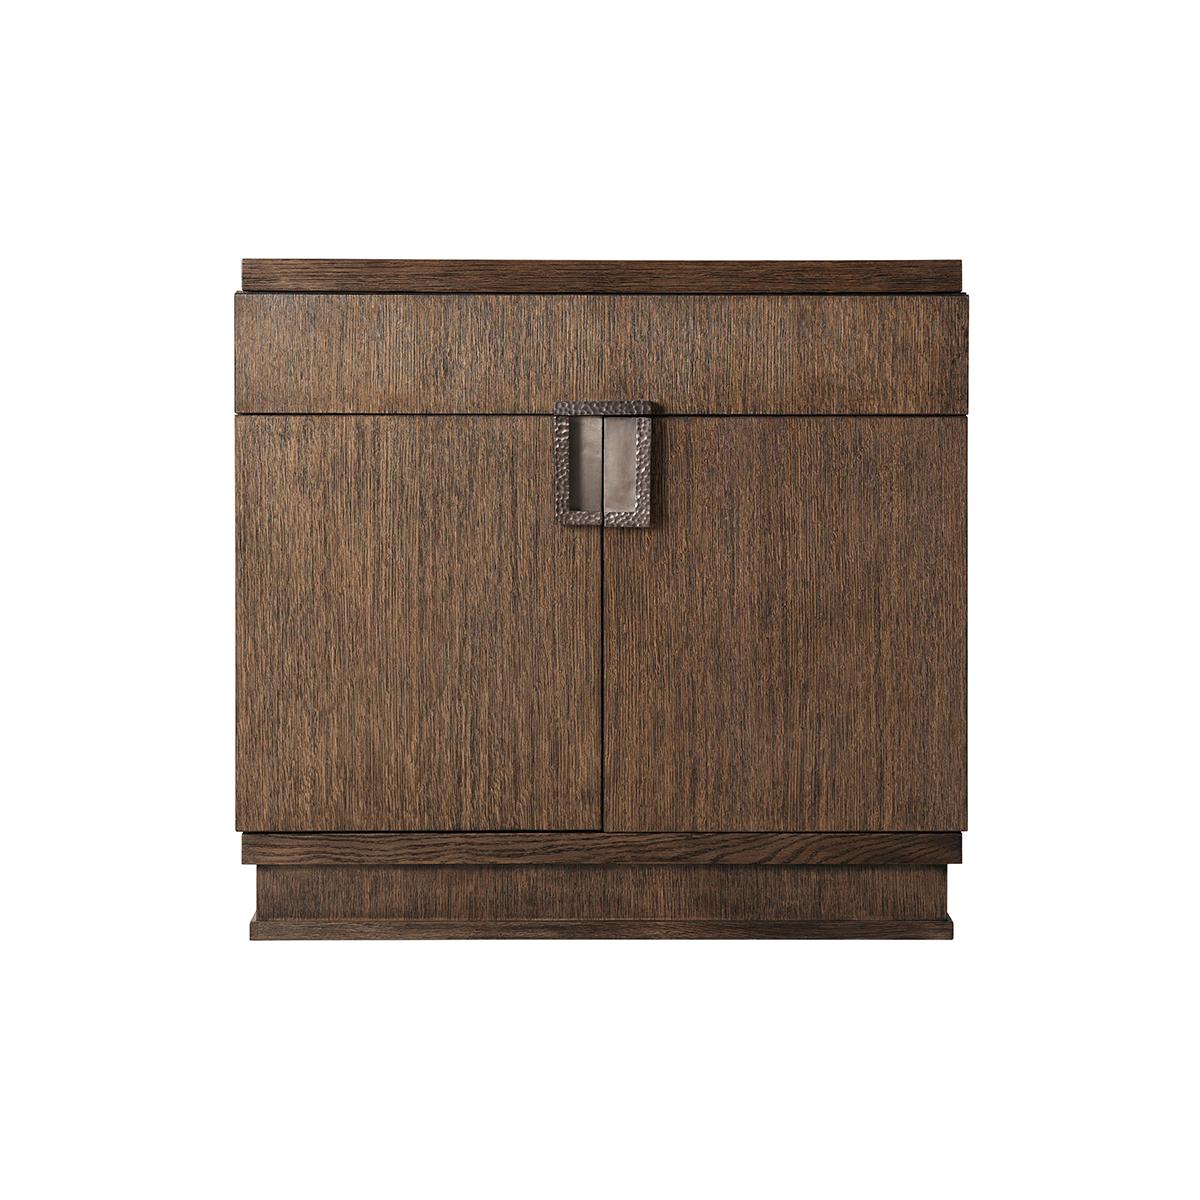 With a quartered oak veneer in the Charteris finish. With a rectangular top above a frieze drawer and two cabinet doors. With a modern brass finish handle with a hammered design. 
Dimensions: 30